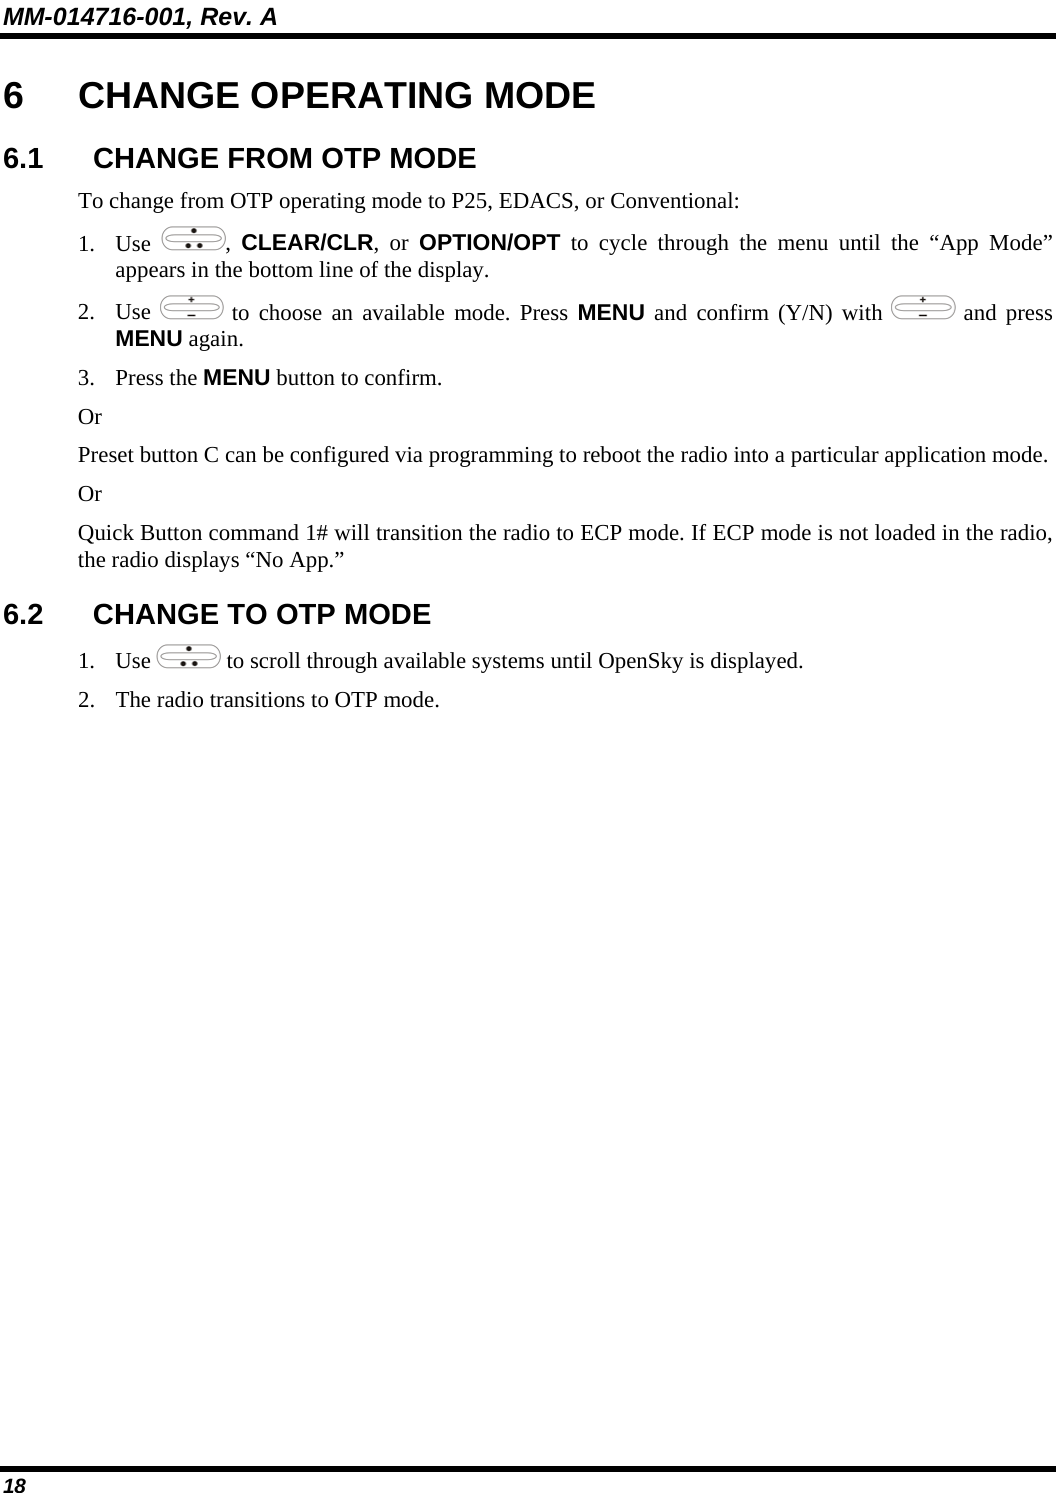 MM-014716-001, Rev. A 18 6  CHANGE OPERATING MODE 6.1  CHANGE FROM OTP MODE To change from OTP operating mode to P25, EDACS, or Conventional: 1. Use  ,  CLEAR/CLR, or OPTION/OPT to cycle through the menu until the “App Mode” appears in the bottom line of the display. 2. Use   to choose an available mode. Press MENU and confirm (Y/N) with   and press MENU again. 3. Press the MENU button to confirm.  Or Preset button C can be configured via programming to reboot the radio into a particular application mode. Or Quick Button command 1# will transition the radio to ECP mode. If ECP mode is not loaded in the radio, the radio displays “No App.” 6.2  CHANGE TO OTP MODE 1. Use   to scroll through available systems until OpenSky is displayed.  2. The radio transitions to OTP mode.  